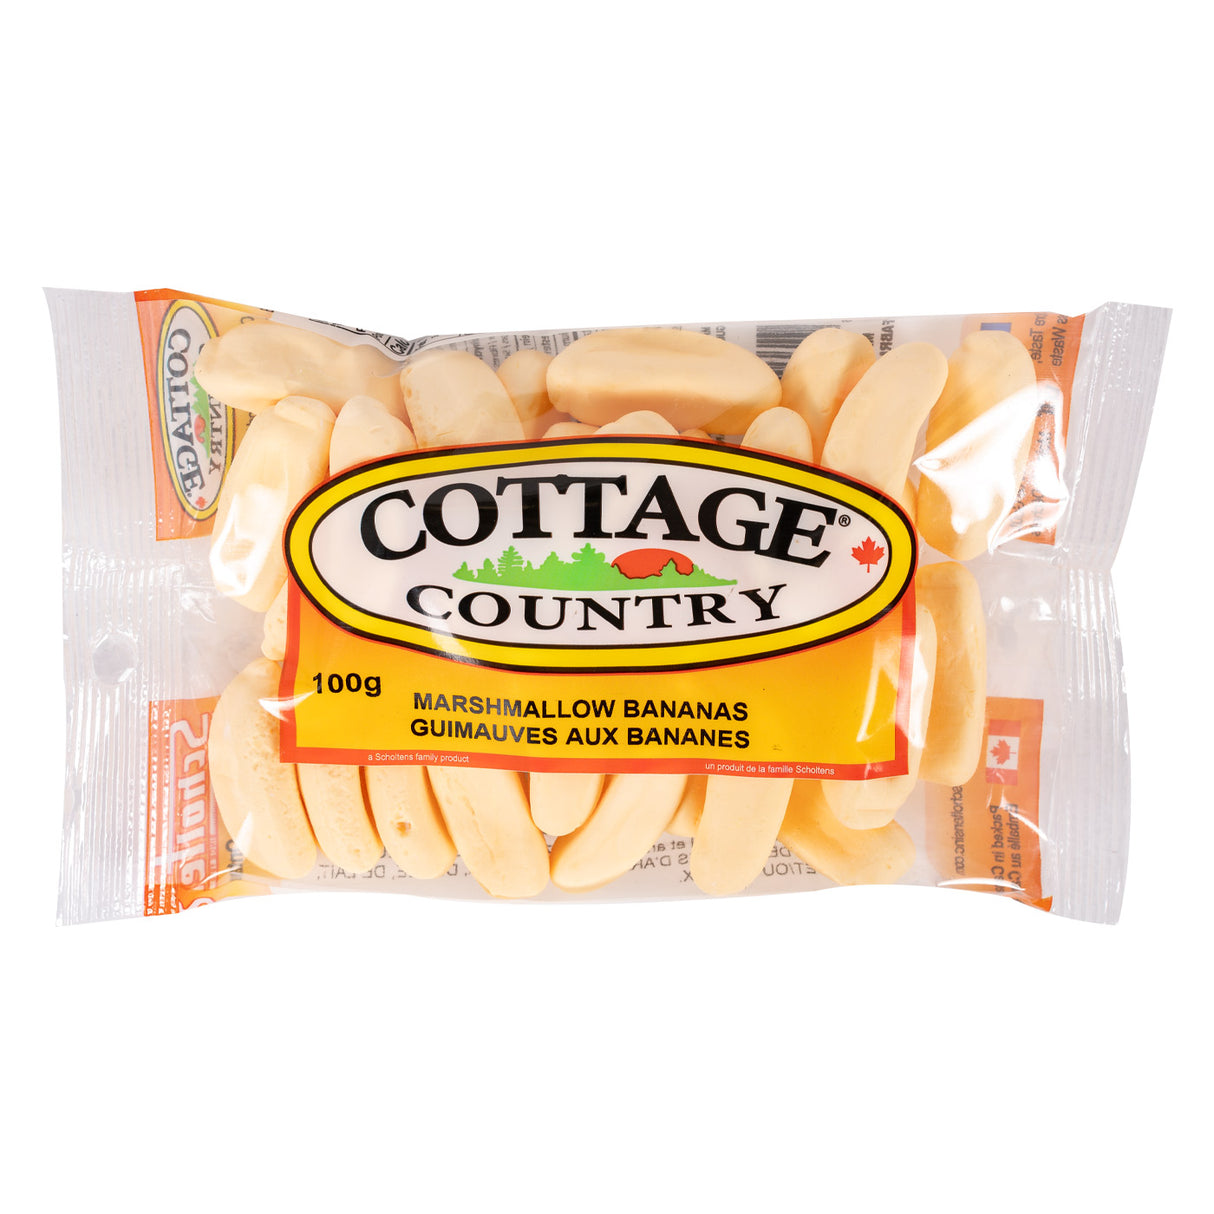 Cottage Country Marshmallow Bananas 100 g